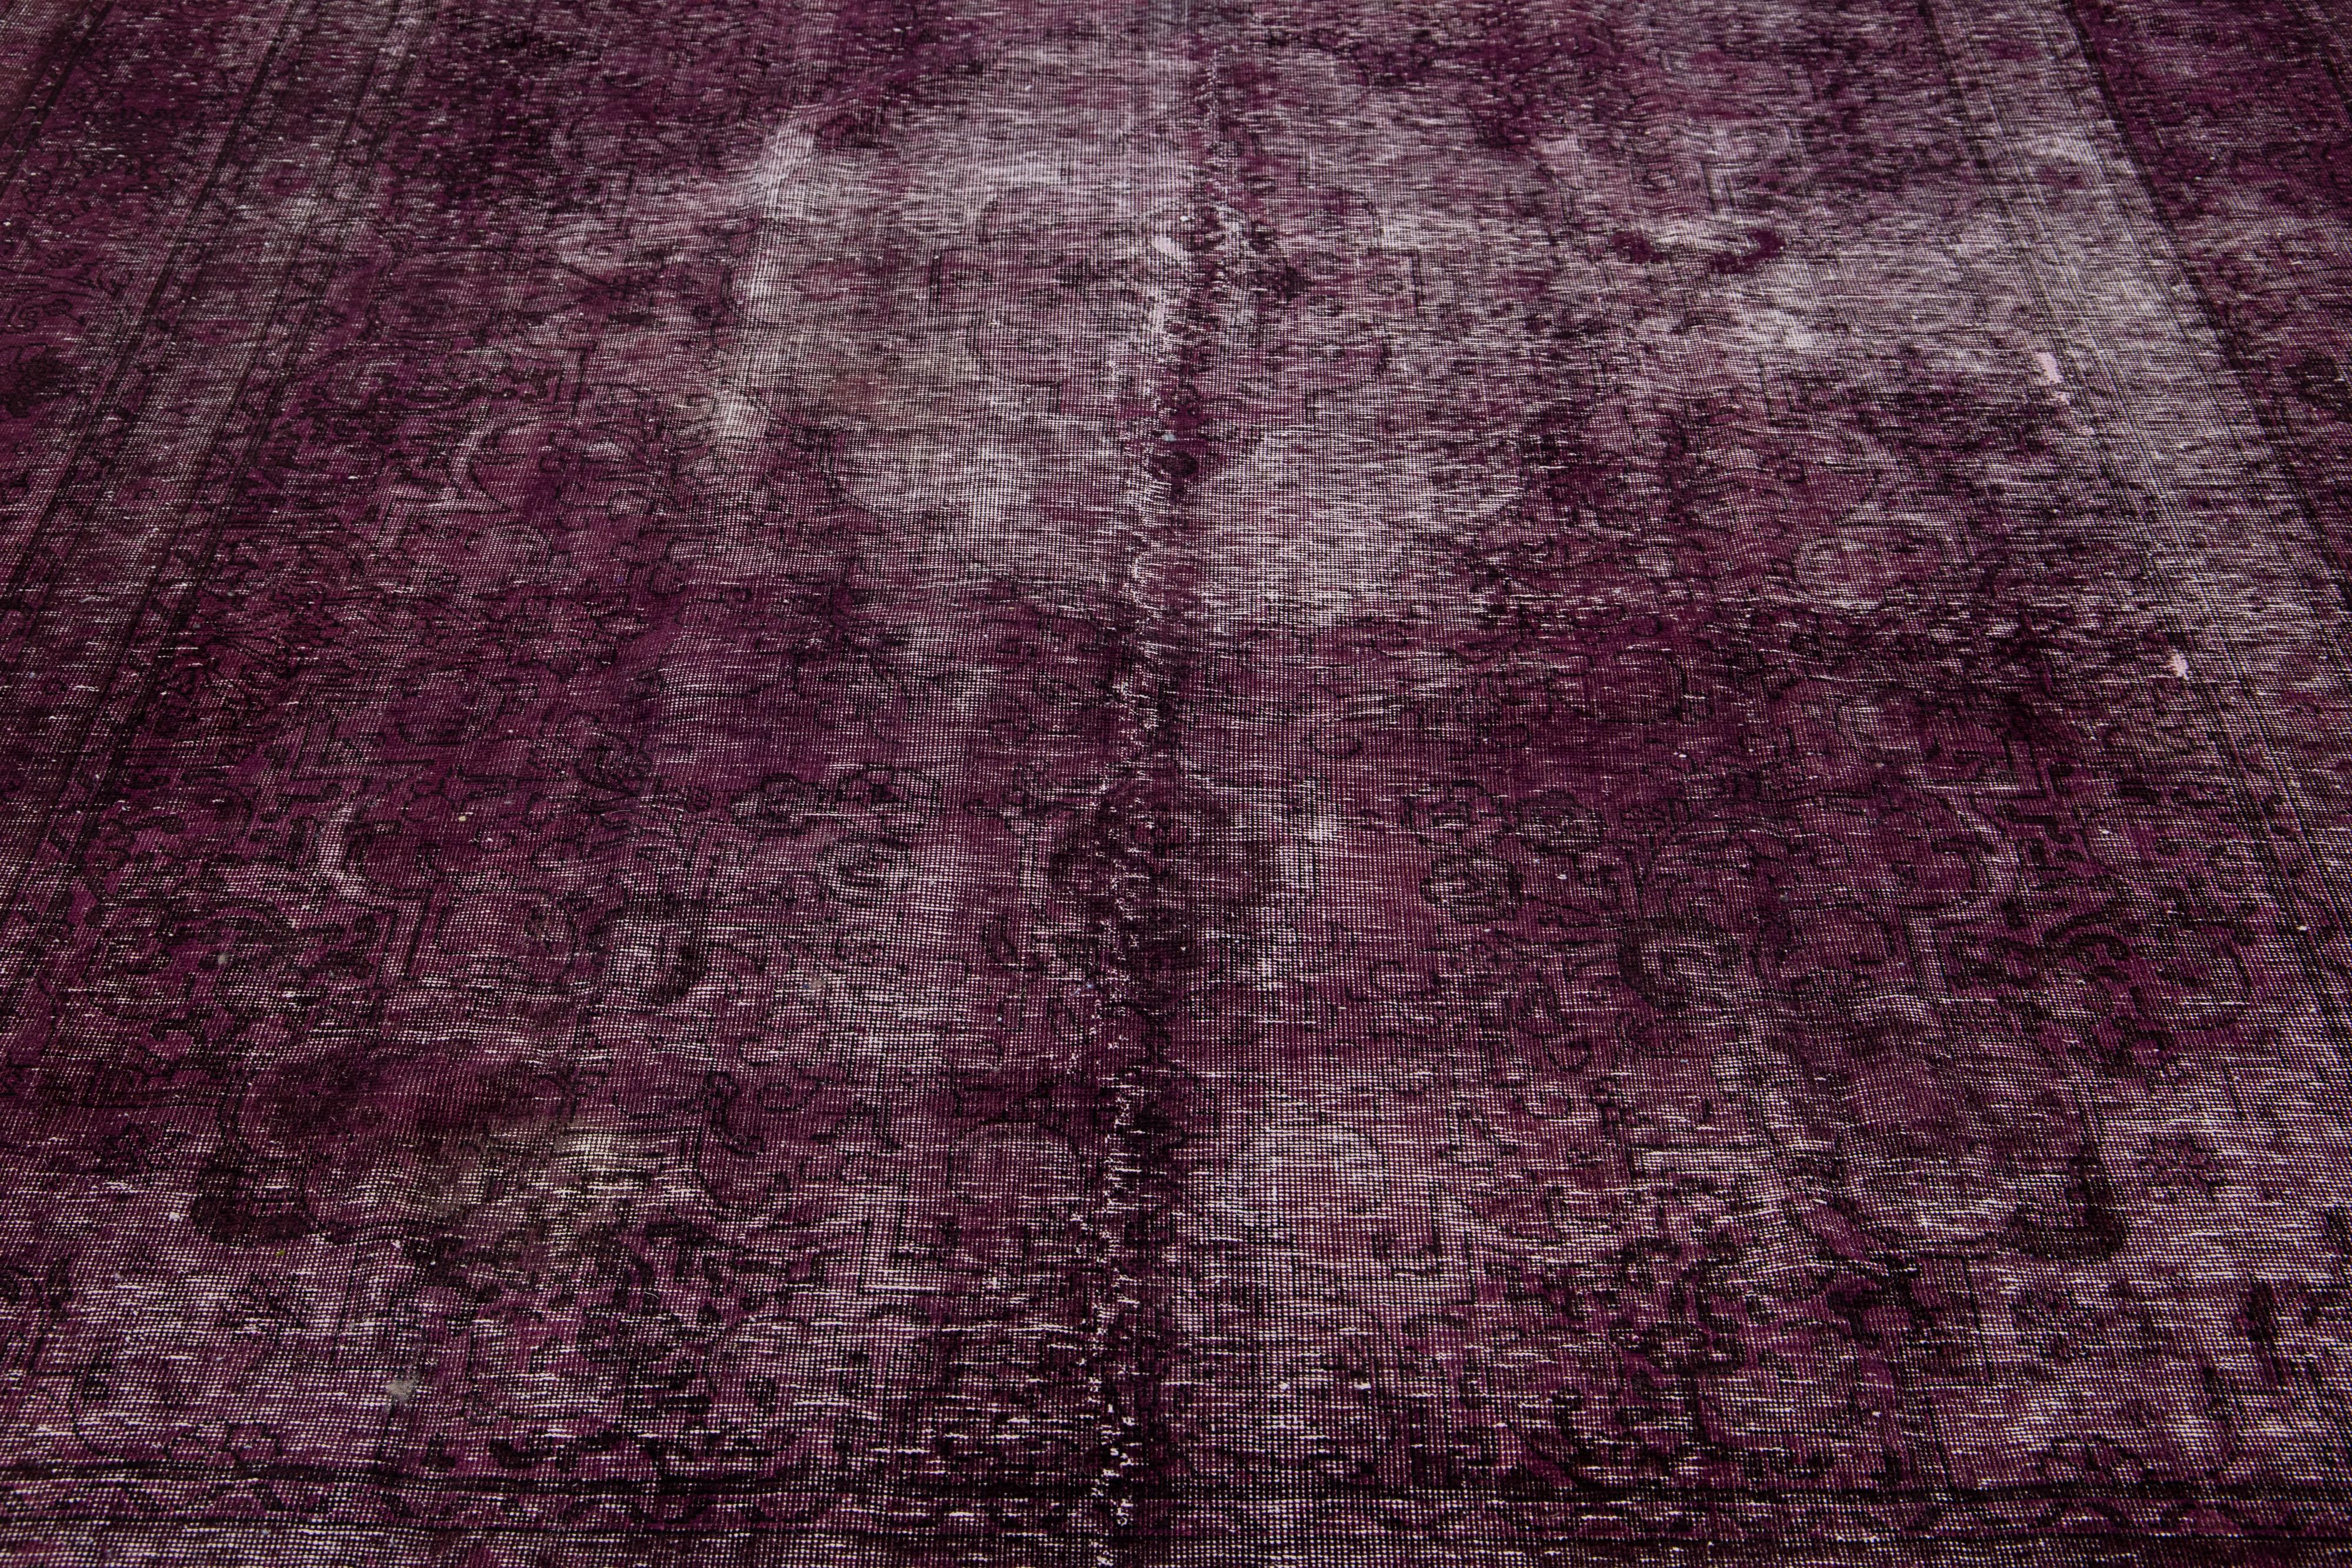 Purple Handmade Vintage Overdyed Wool Rug with Allover Motif In Distressed Condition For Sale In Norwalk, CT